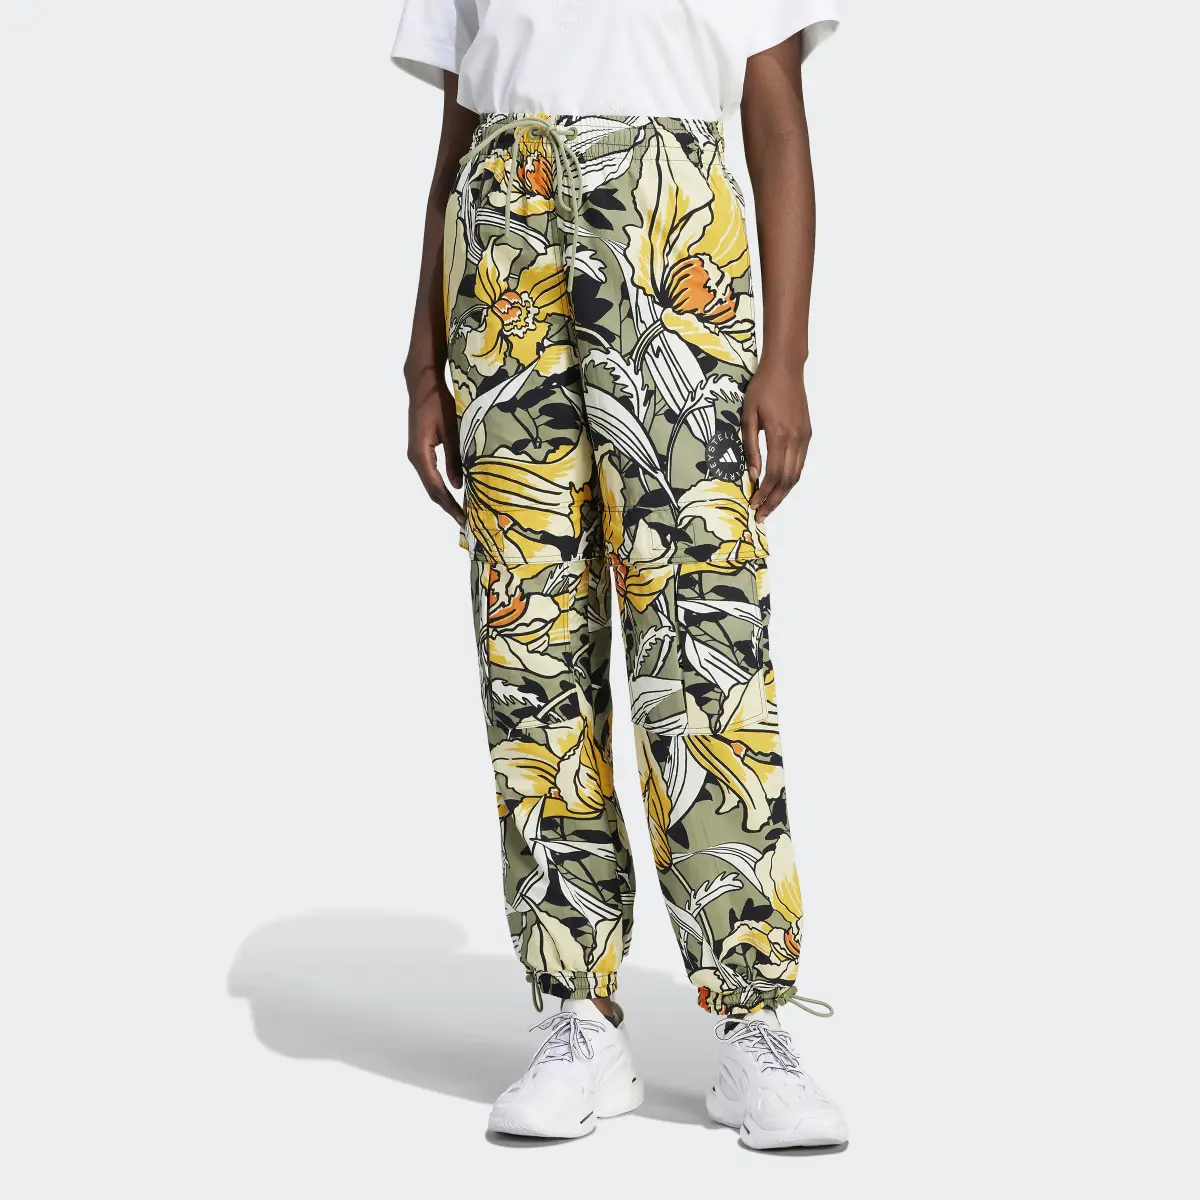 Adidas by Stella McCartney TrueCasuals Woven Printed Track Pants. 1